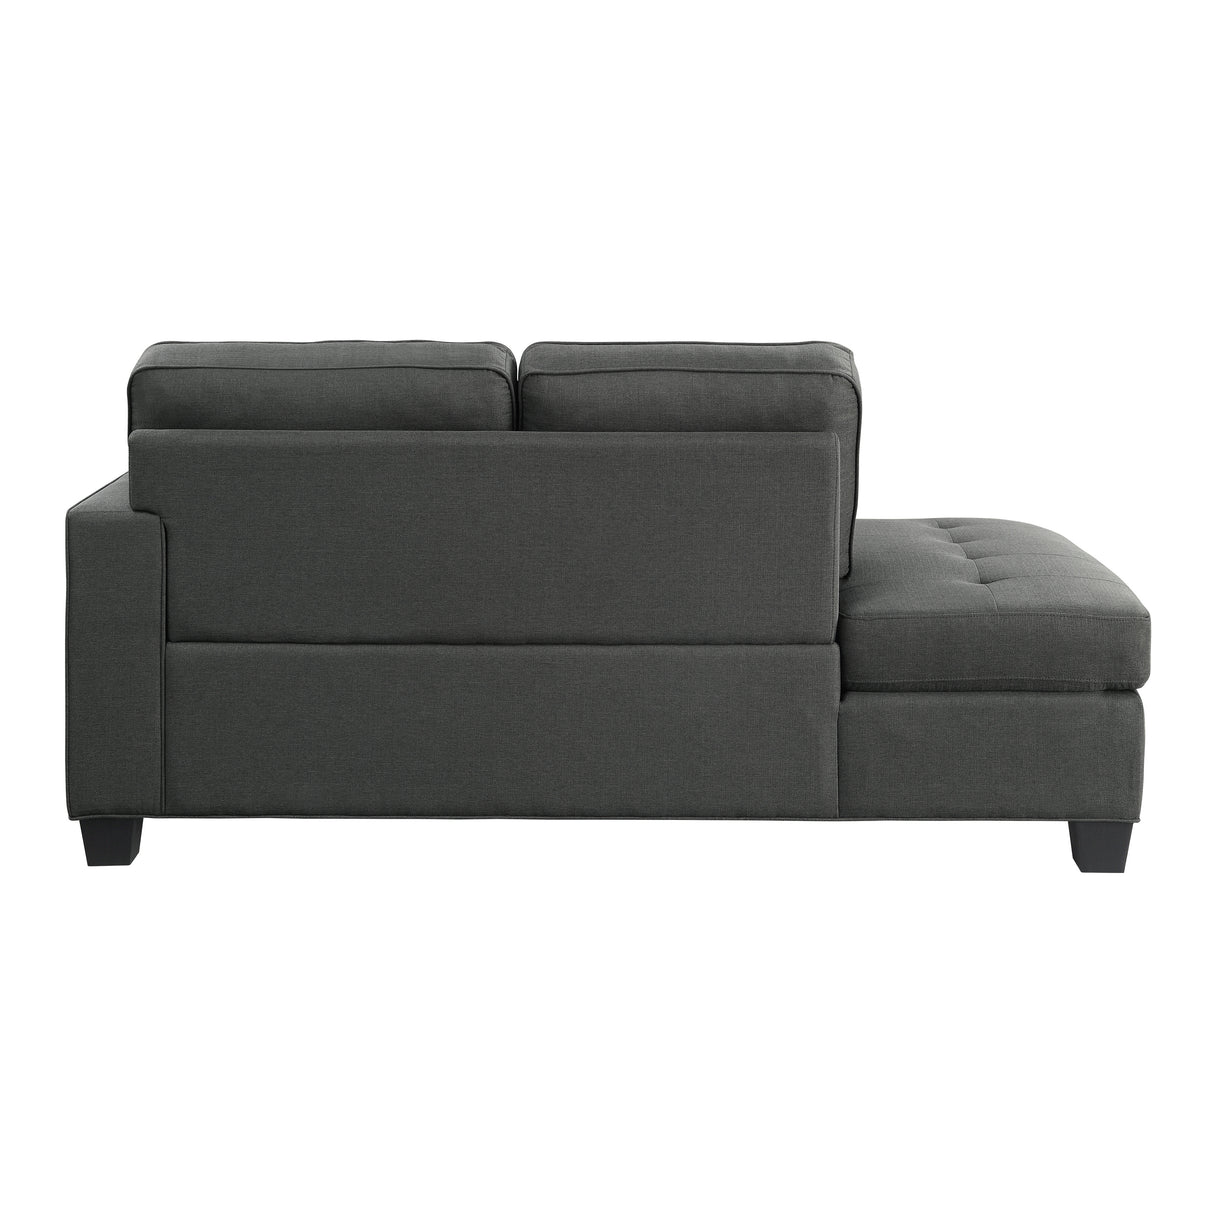 Elmont Charcoal Chaise